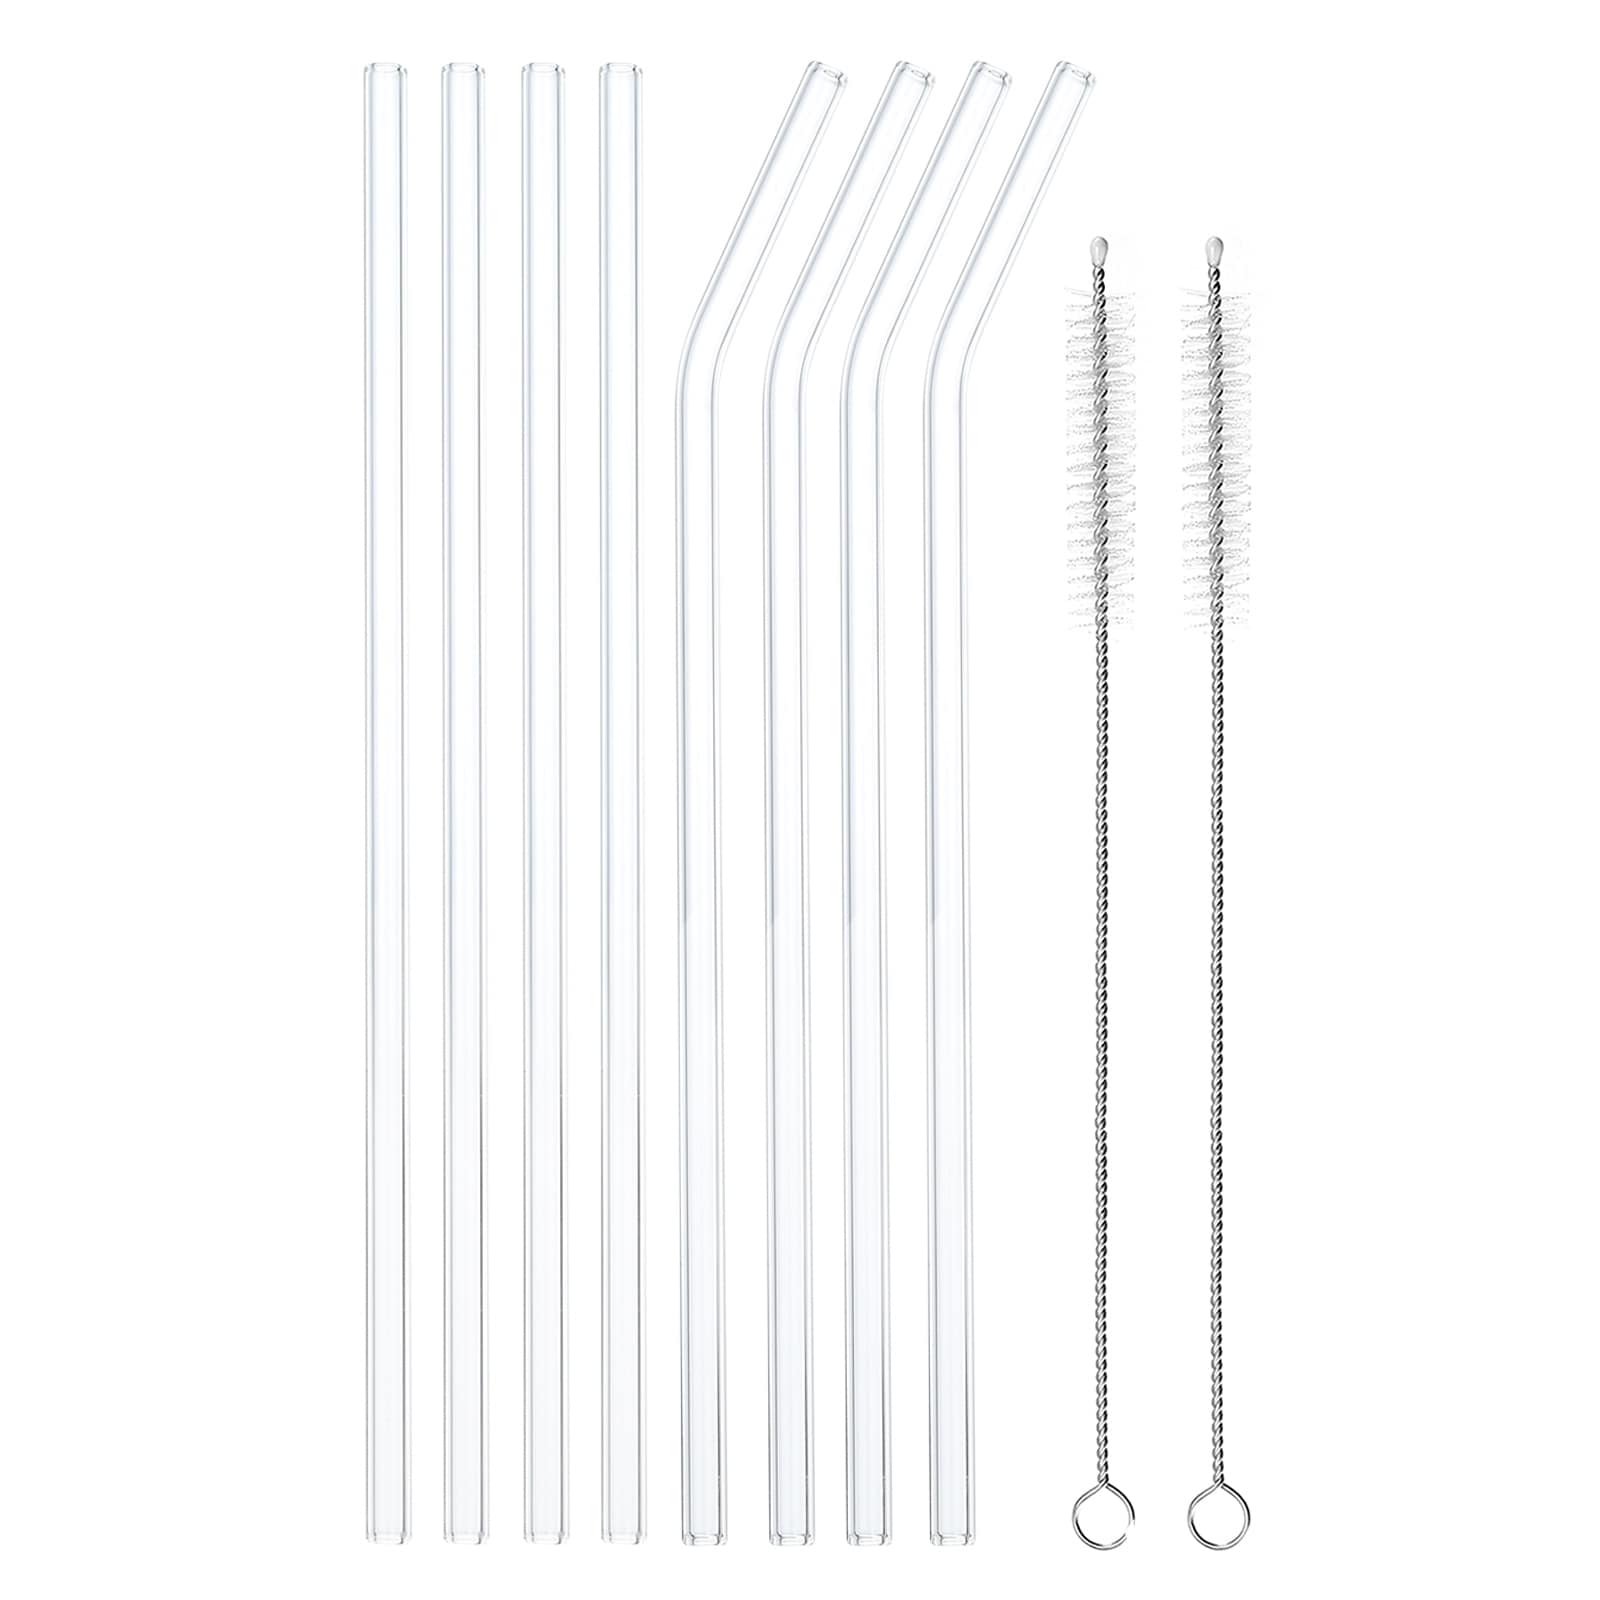 https://ak1.ostkcdn.com/images/products/is/images/direct/afacbc1b3203b35913c7f7e1a514fcd598cee104/Reusable-Straws-Glass-Straw%2C-8pcs-Straw-with-Two-Cleaning-Brush.jpg